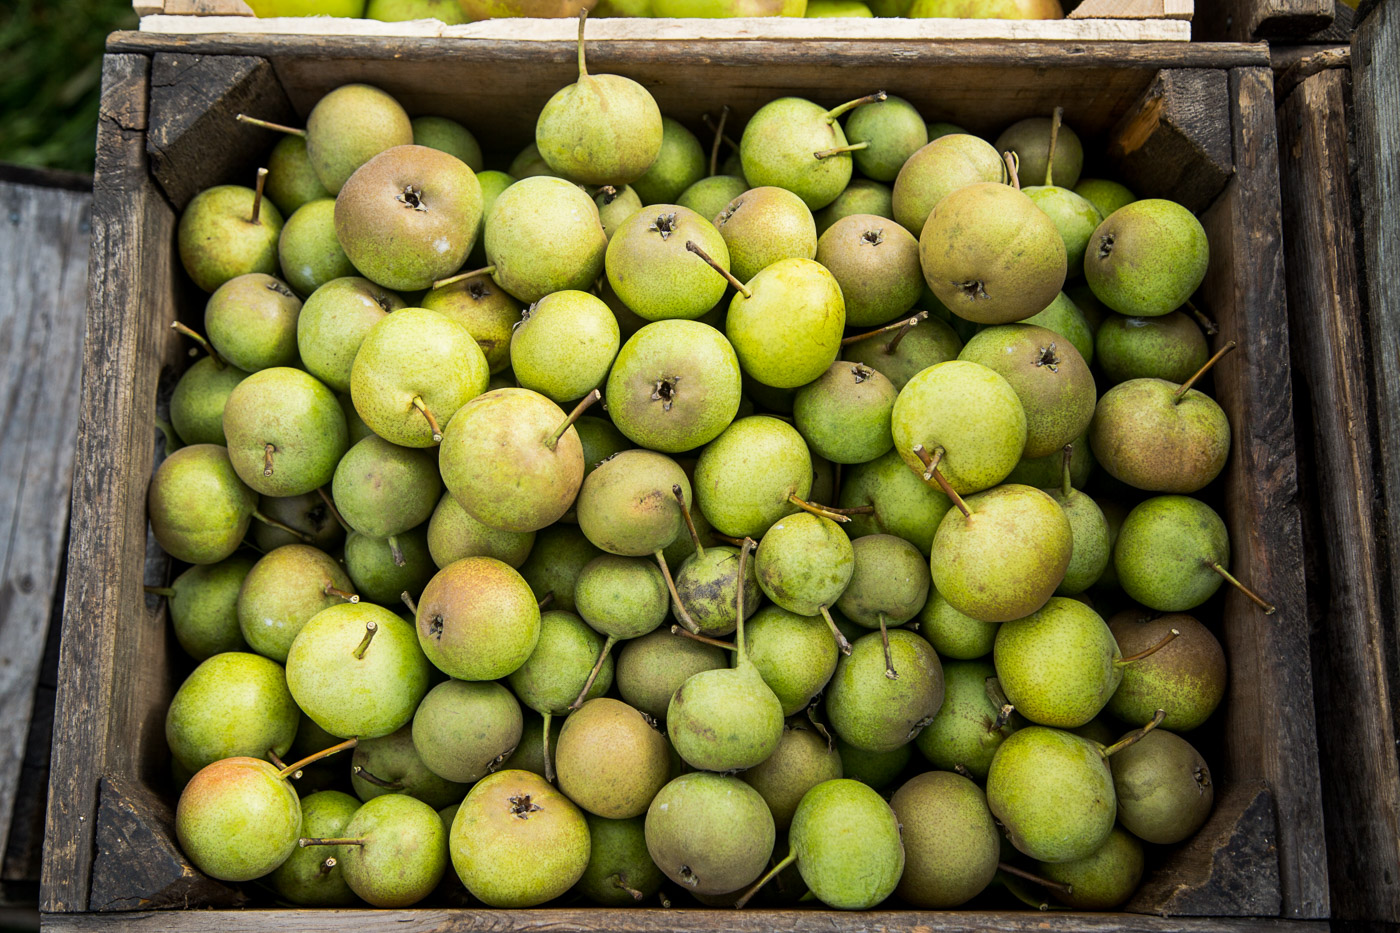 agriculture photographer - heirloom pears in a box after harvest